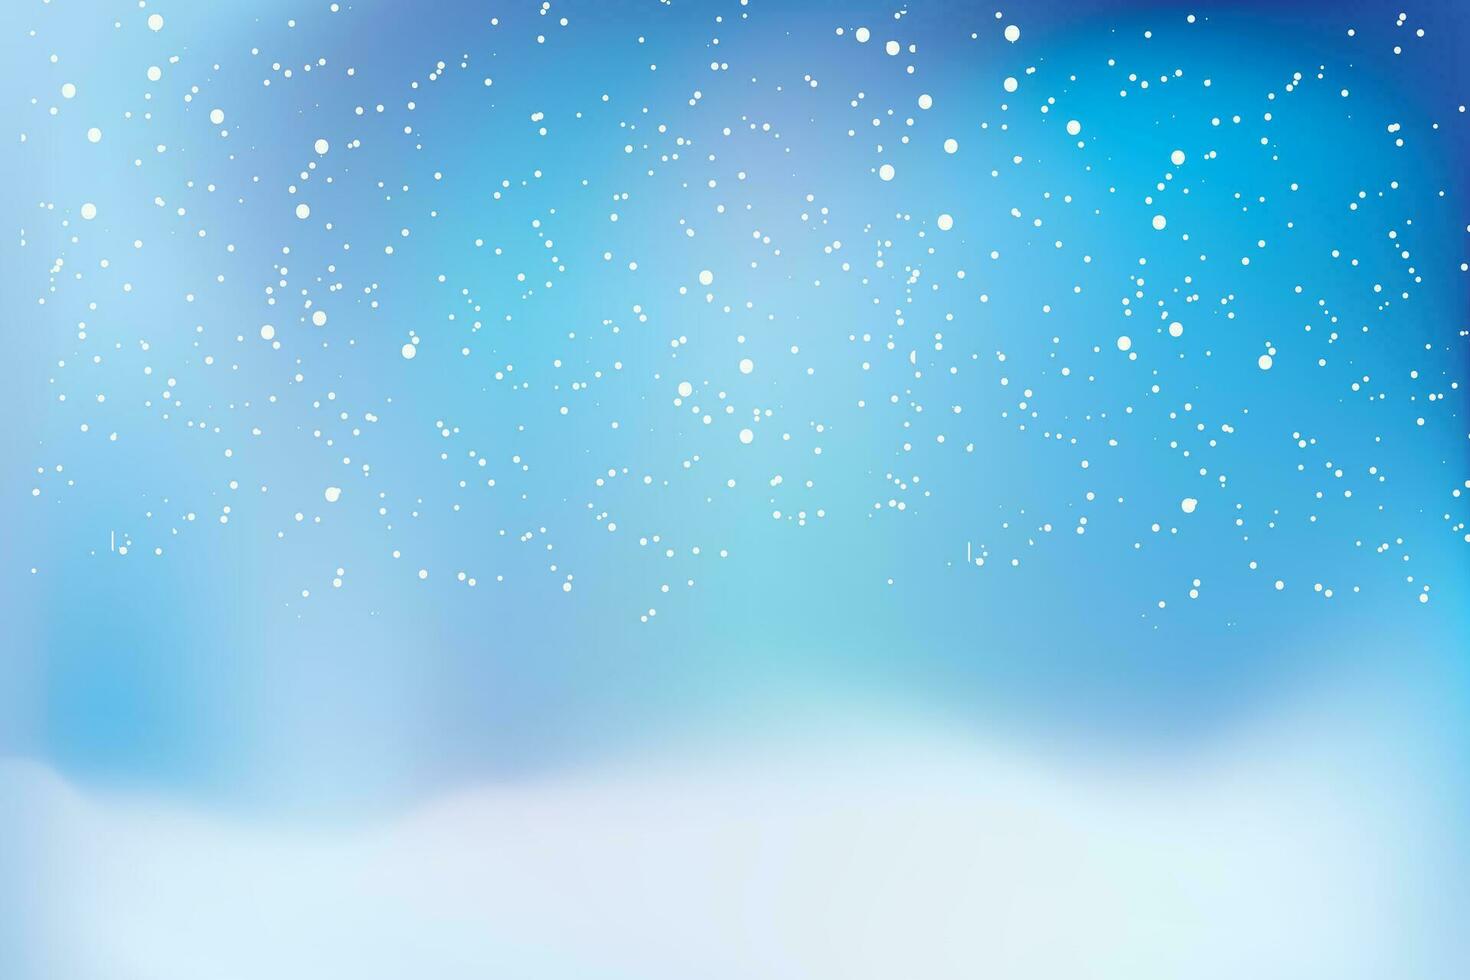 Winter xnow texture and background, seasons and Christmas concept vector